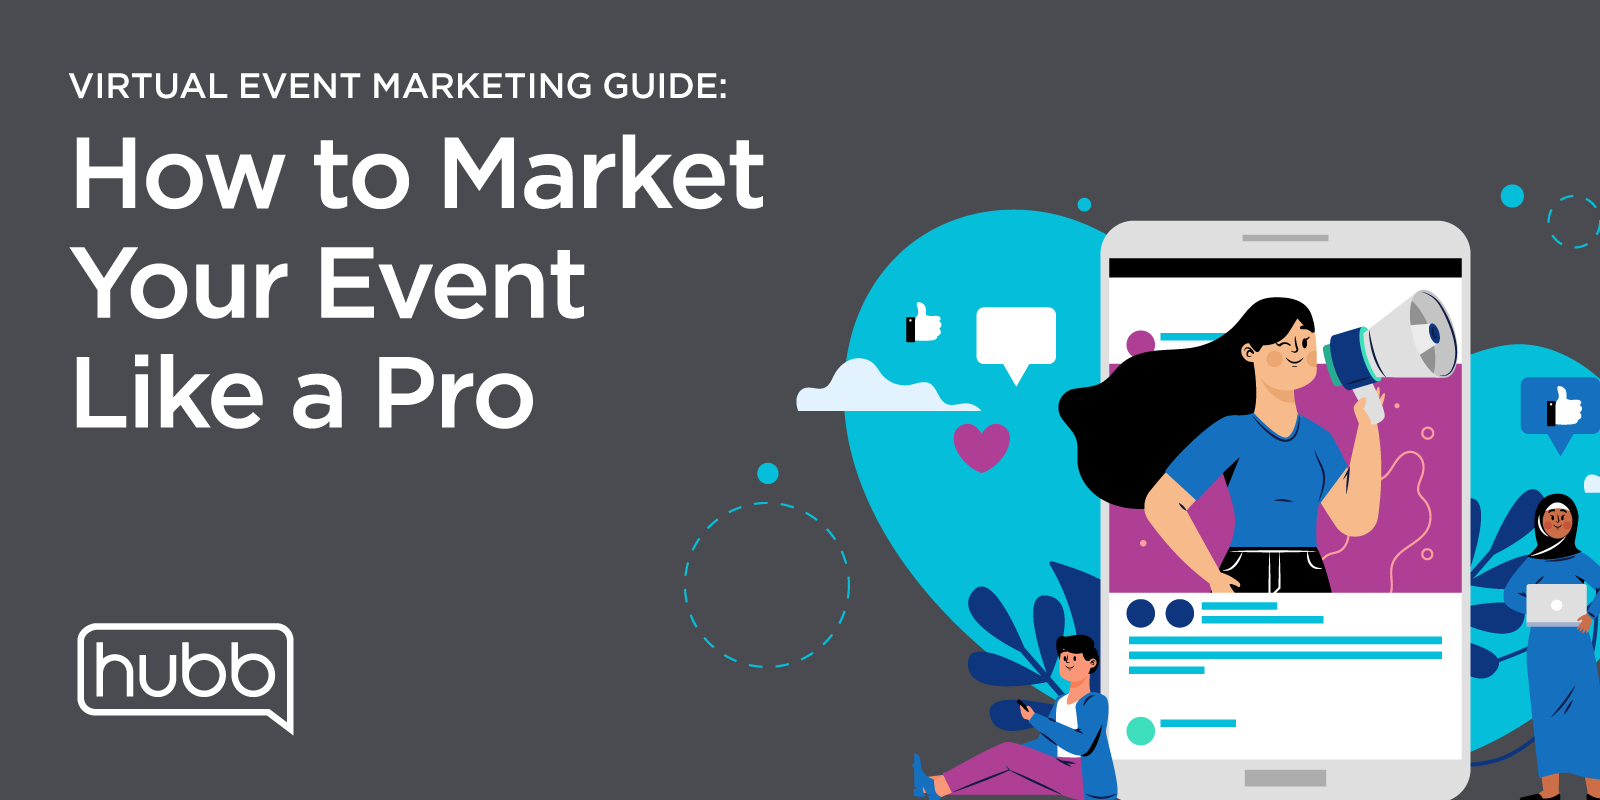 Guide to Virtual Event Marketing: How to market your virtual event like a pro